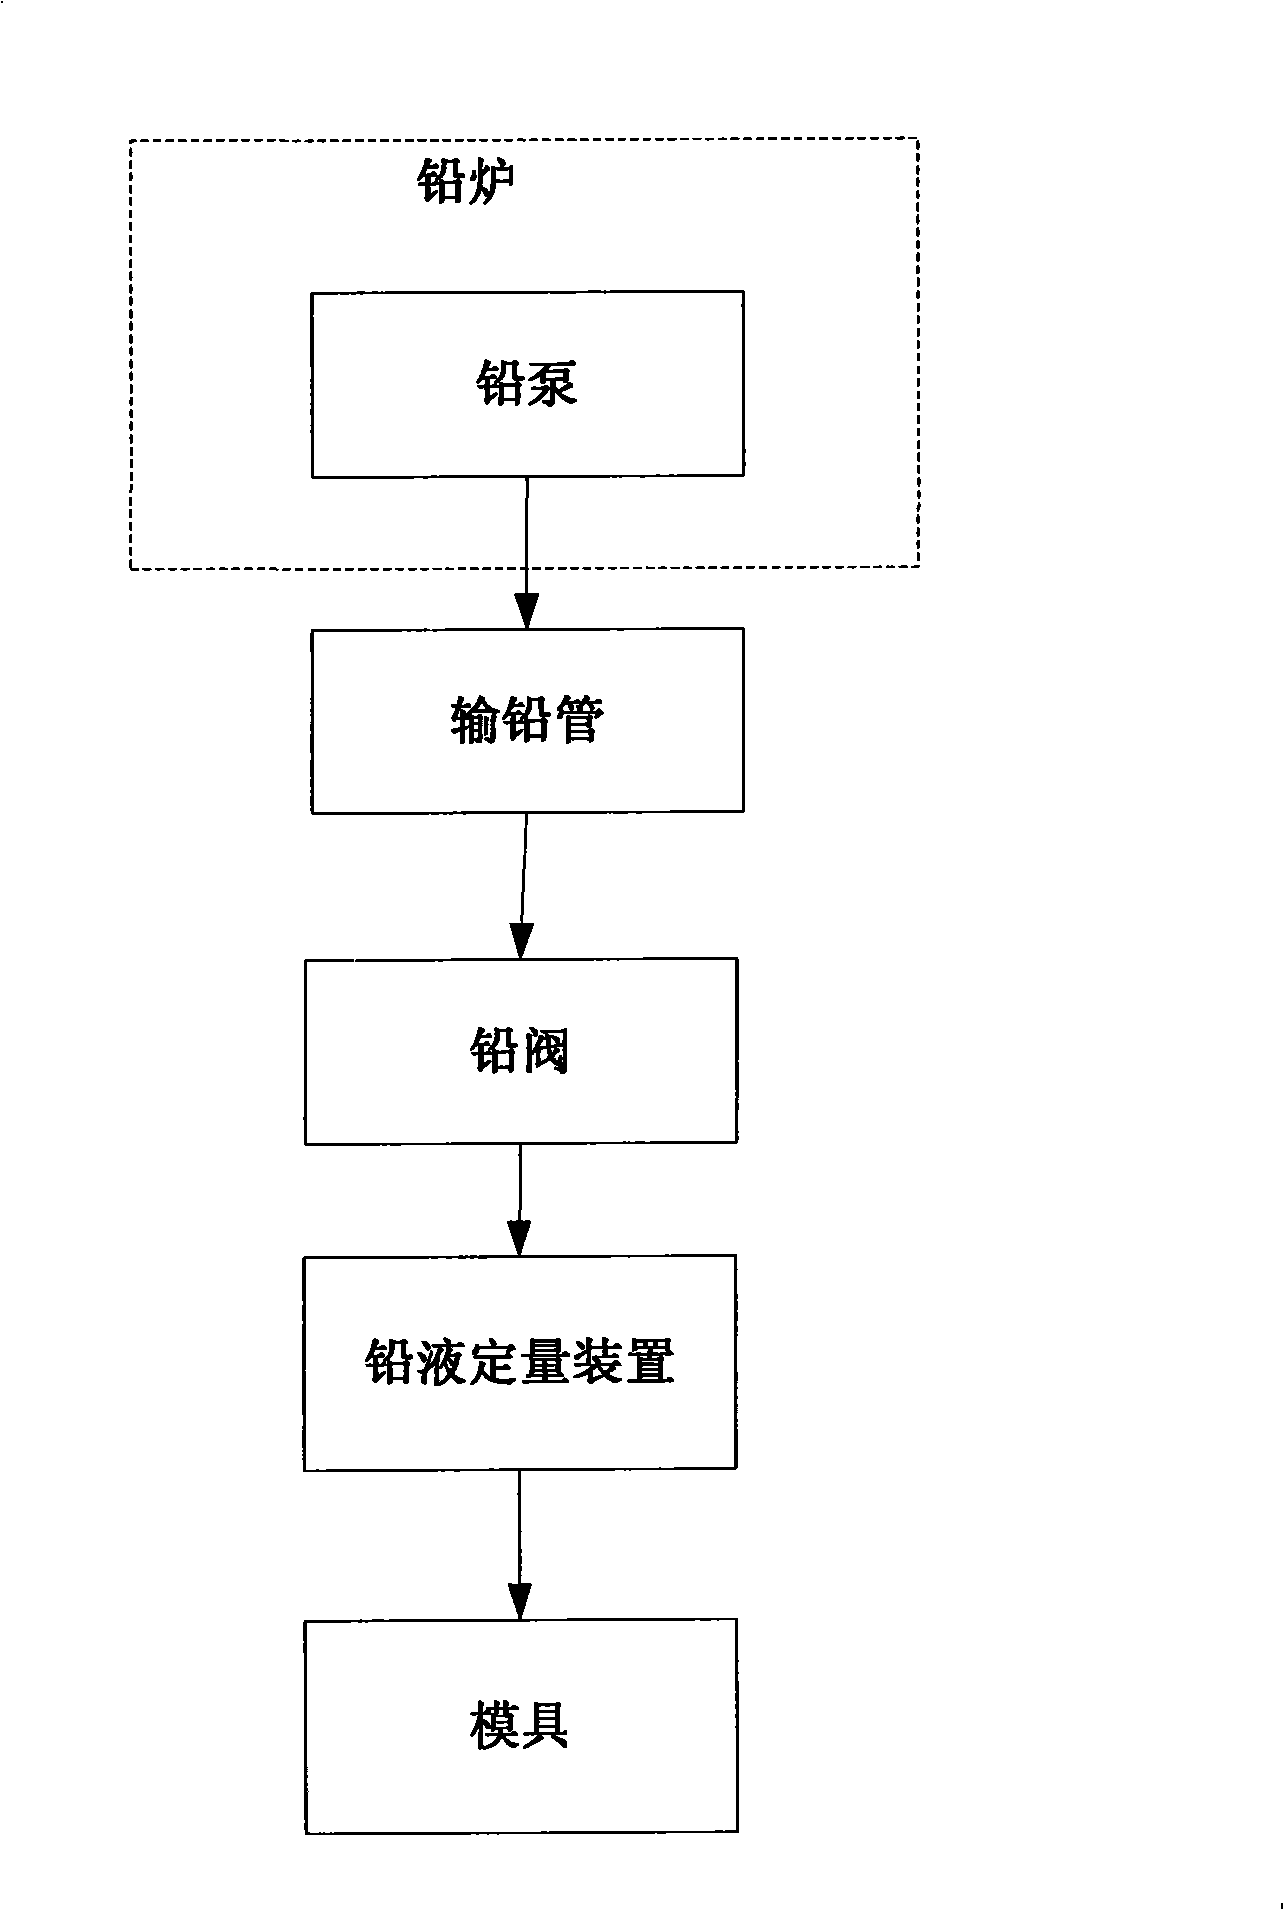 Lead liquid dosing device and plate-casting machine